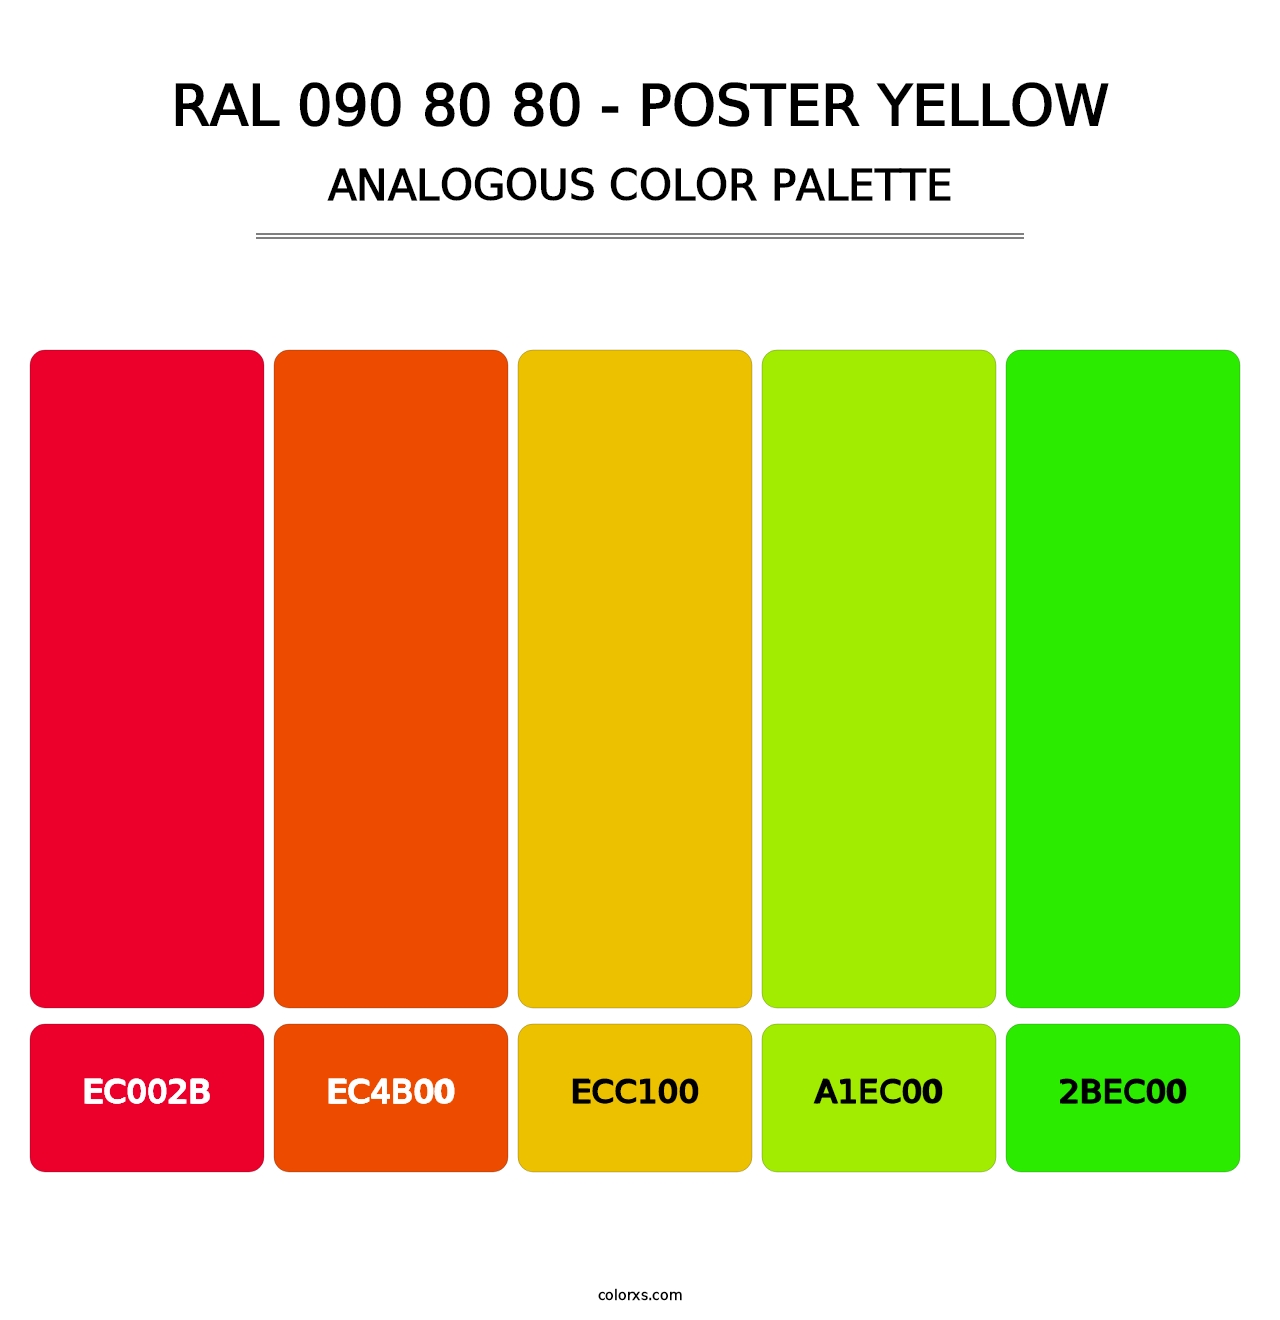 RAL 090 80 80 - Poster Yellow - Analogous Color Palette